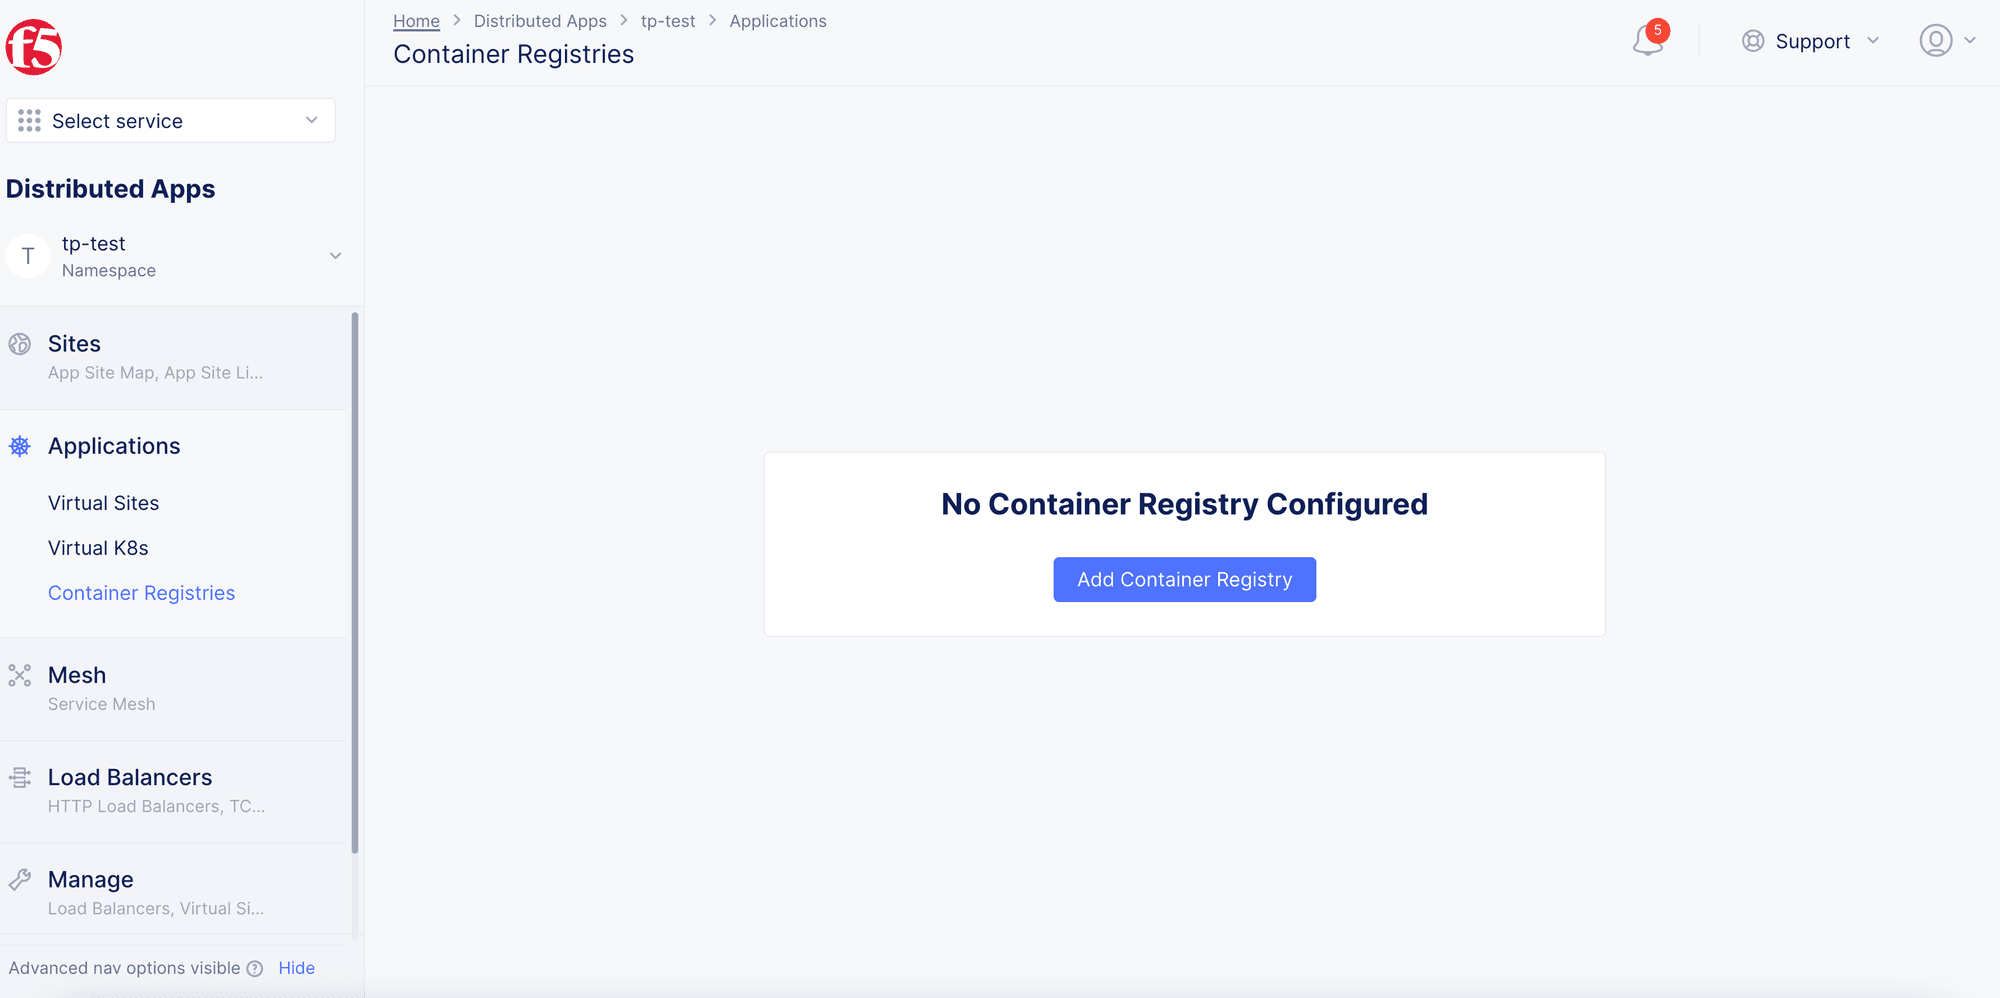 Navigate to Container Registry